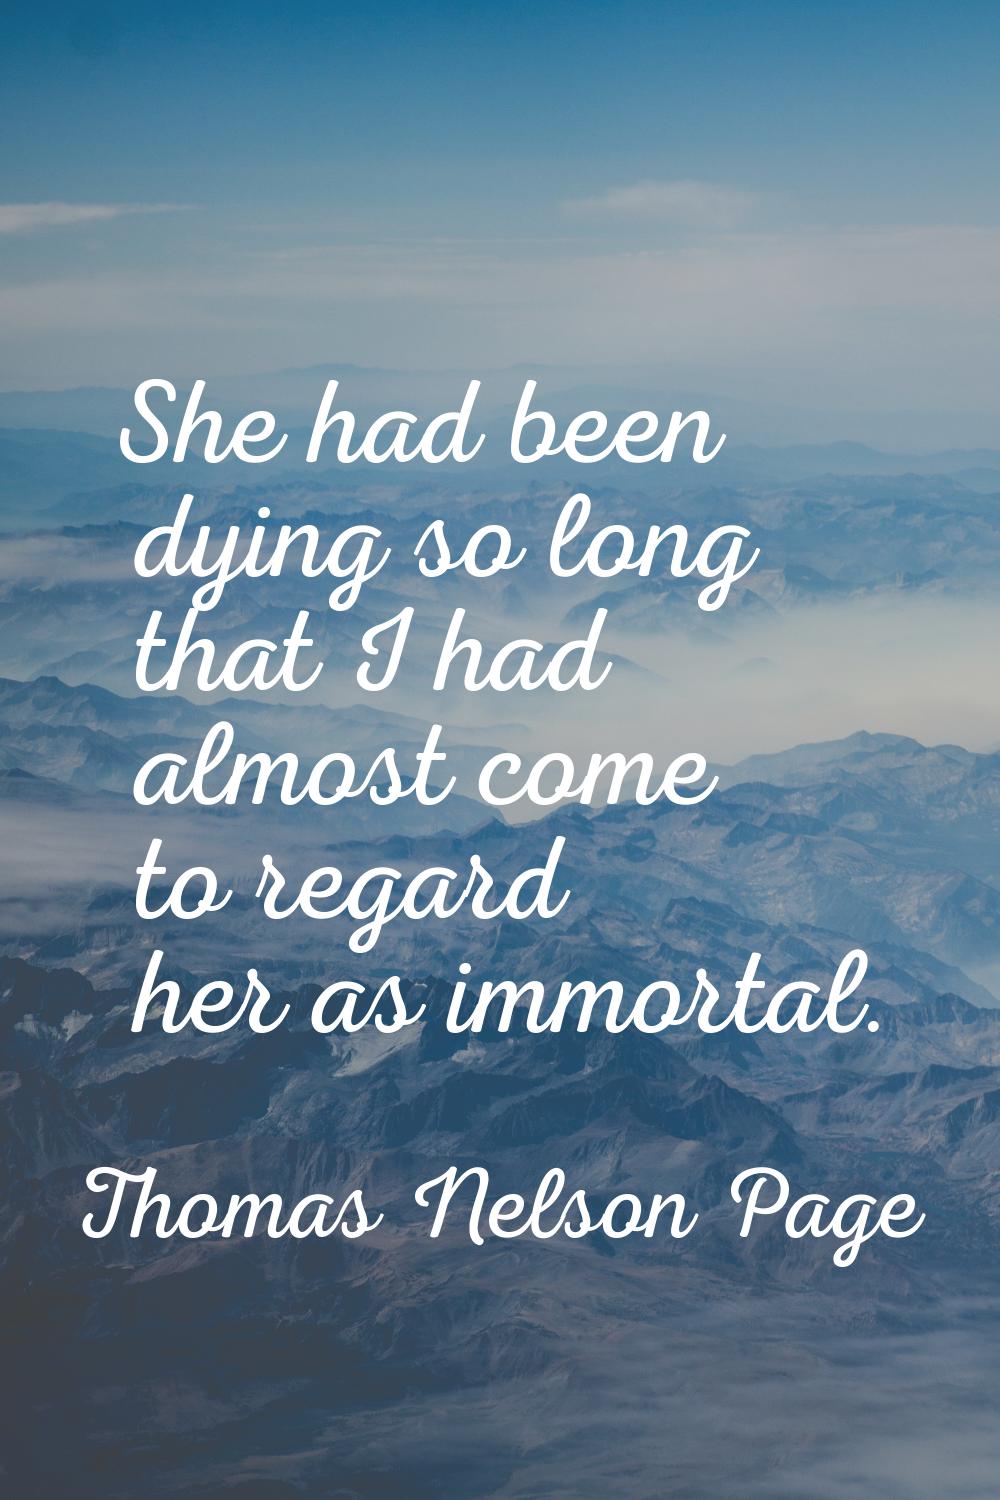 She had been dying so long that I had almost come to regard her as immortal.